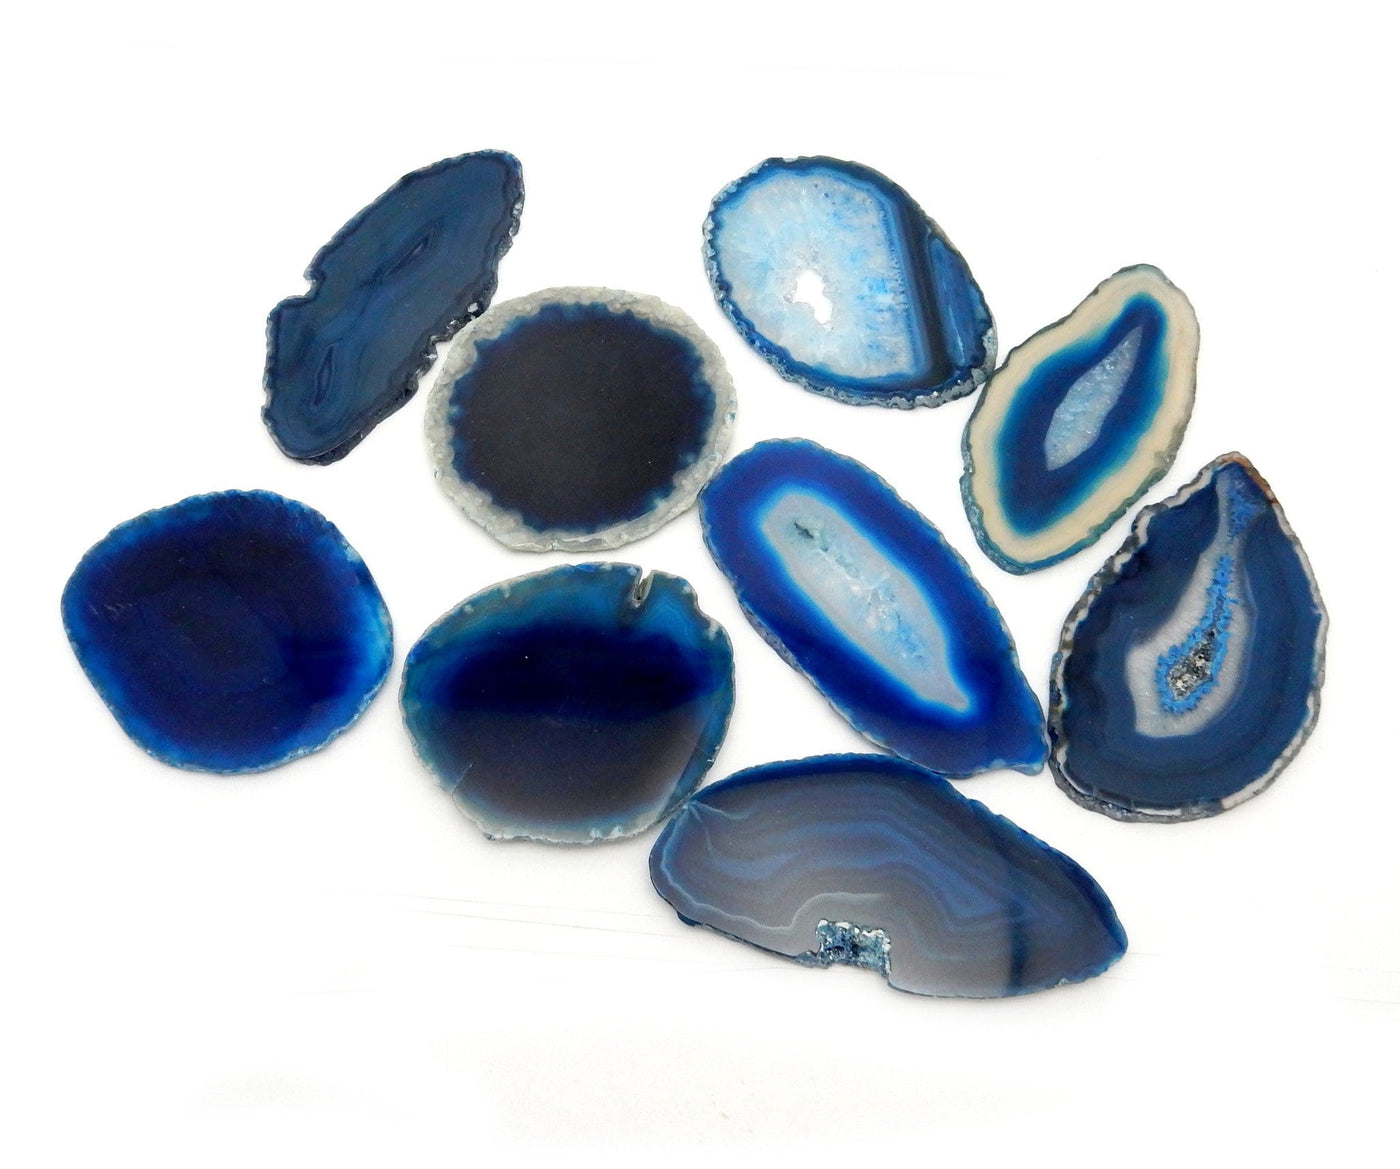 Nine Blue Agate Slices displayed on a white surface.